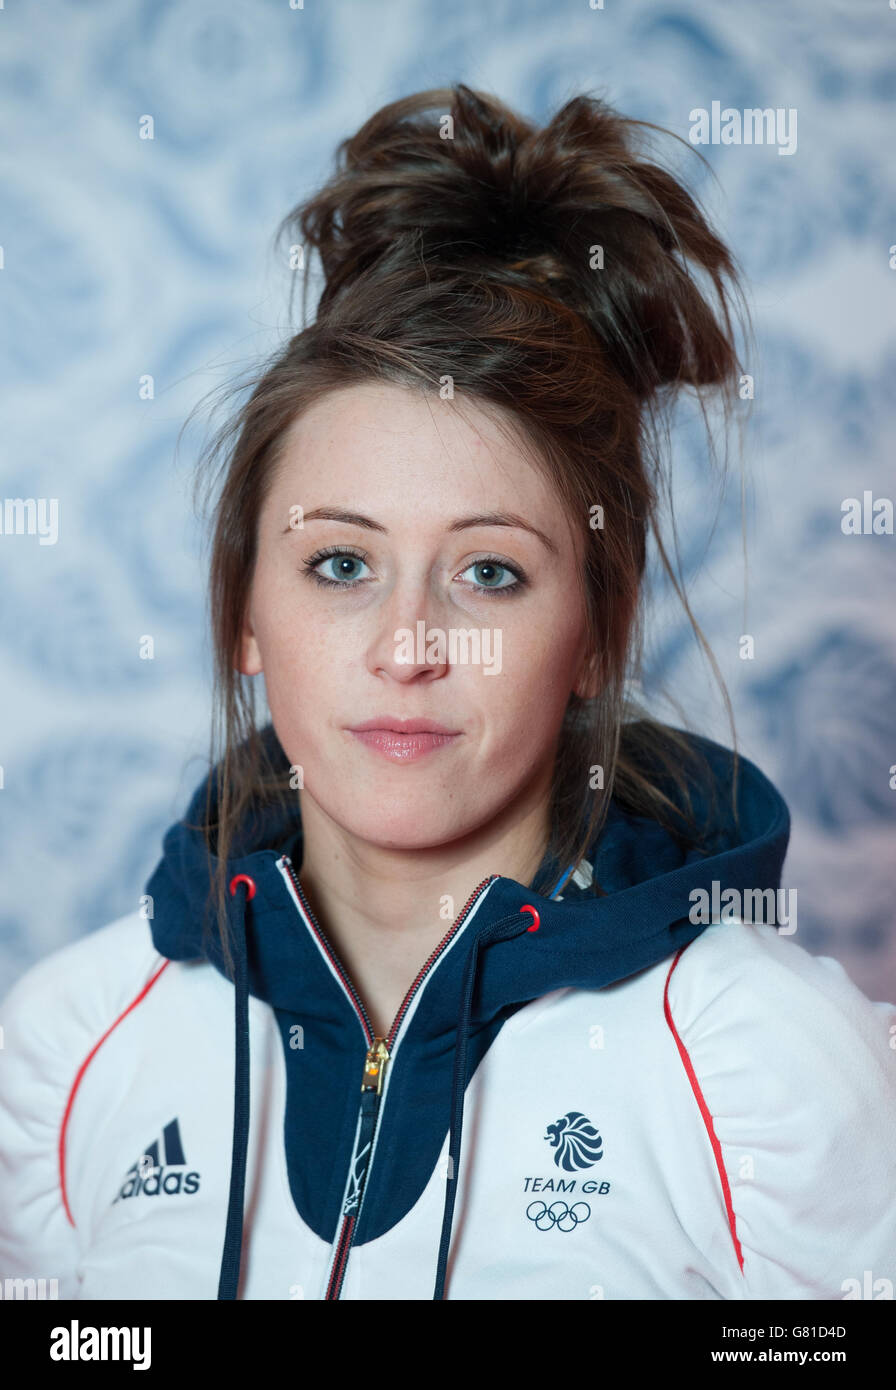 Taekwondo fighter Jade Jones during the kitting out session at the N.E.C, Birmingham. PRESS ASSOCIATION Photo. Picture date: Saturday May 30, 2015. Photo credit should read: Tim Goode/PA Wire Stock Photo